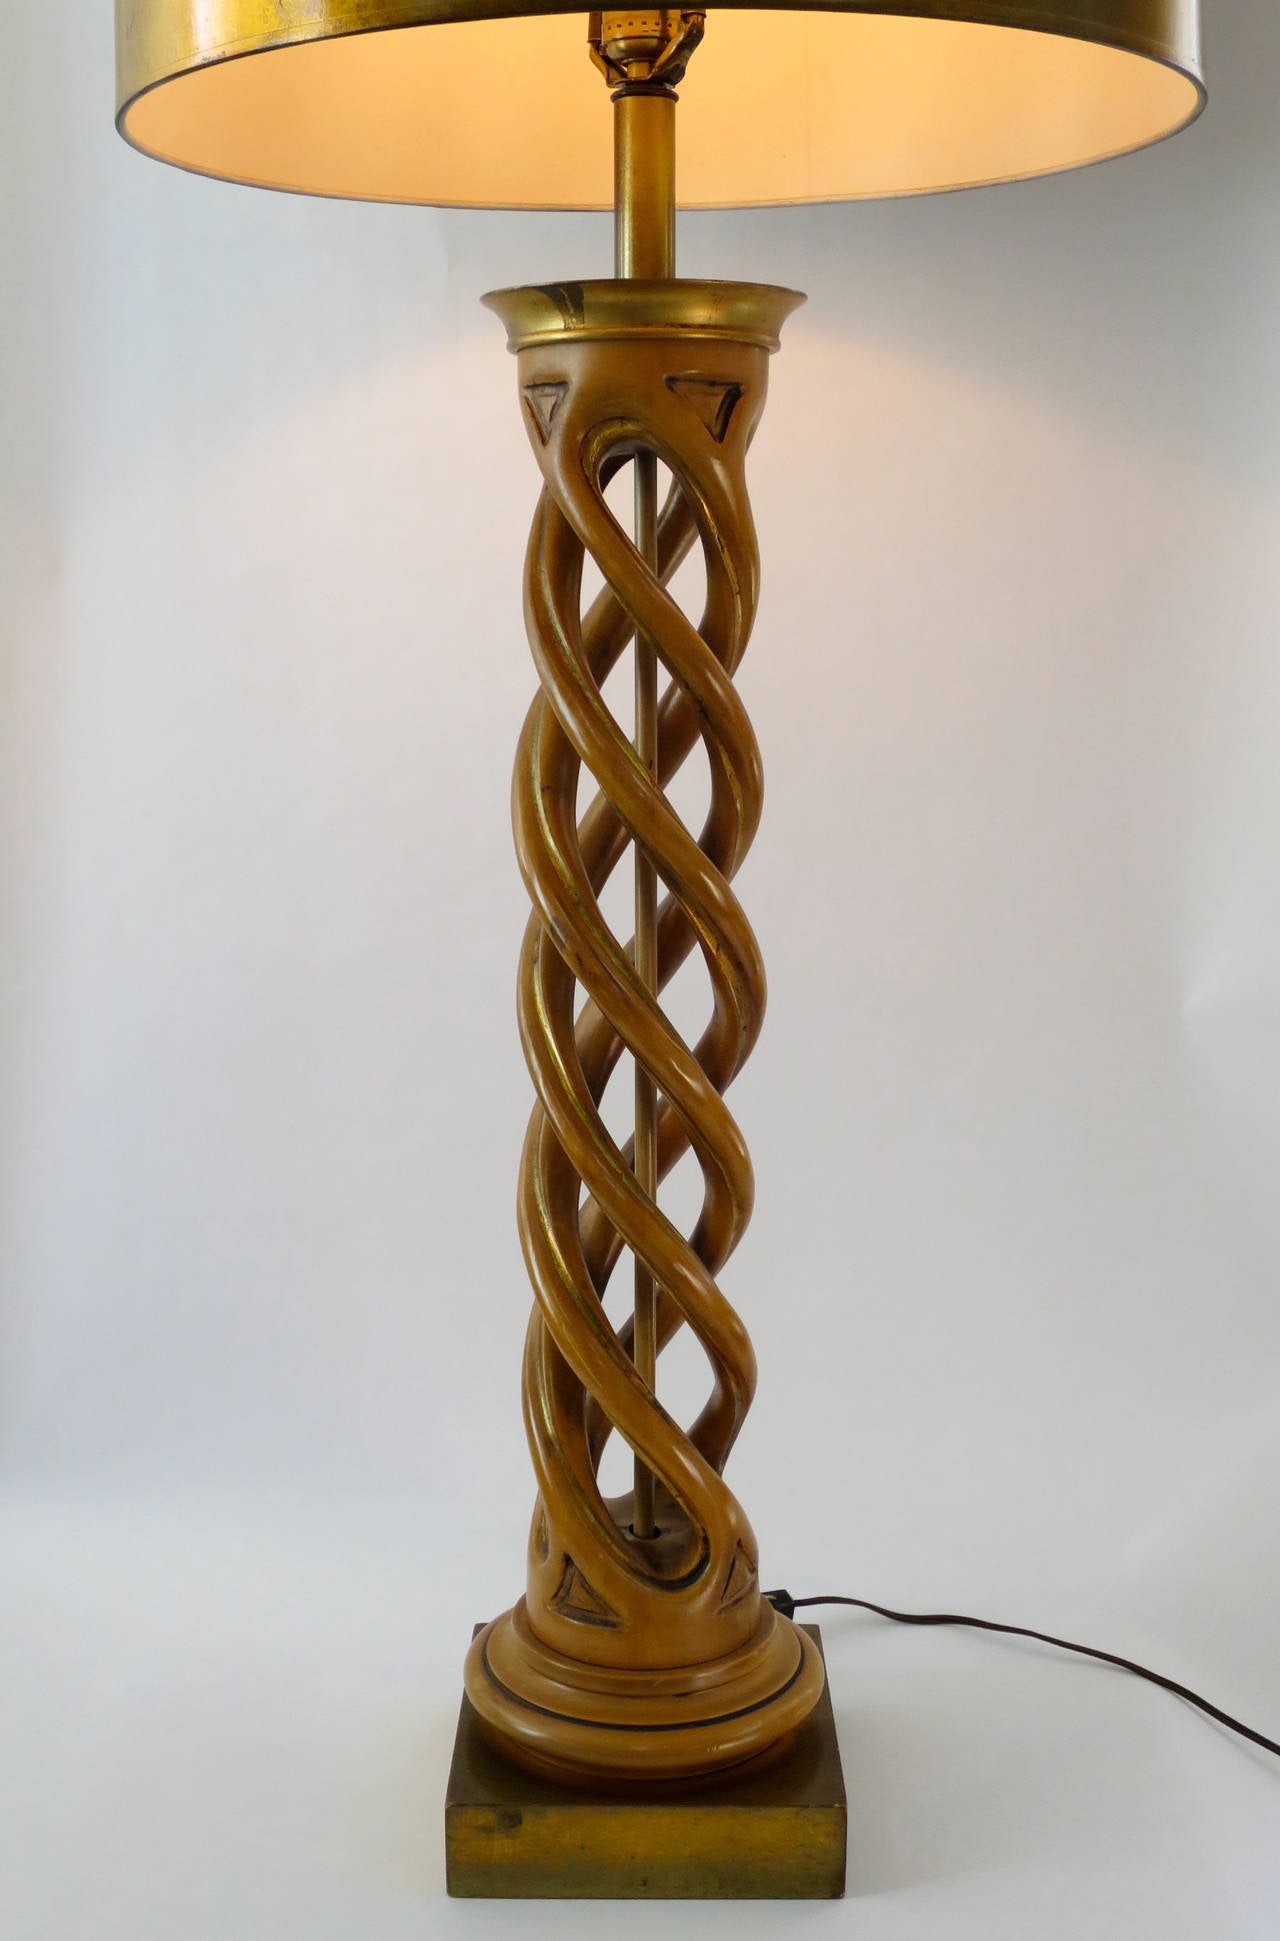 Carved Helix Table Lamp by James Mont.  Excellent condition with original shade.  Circa 1950s.